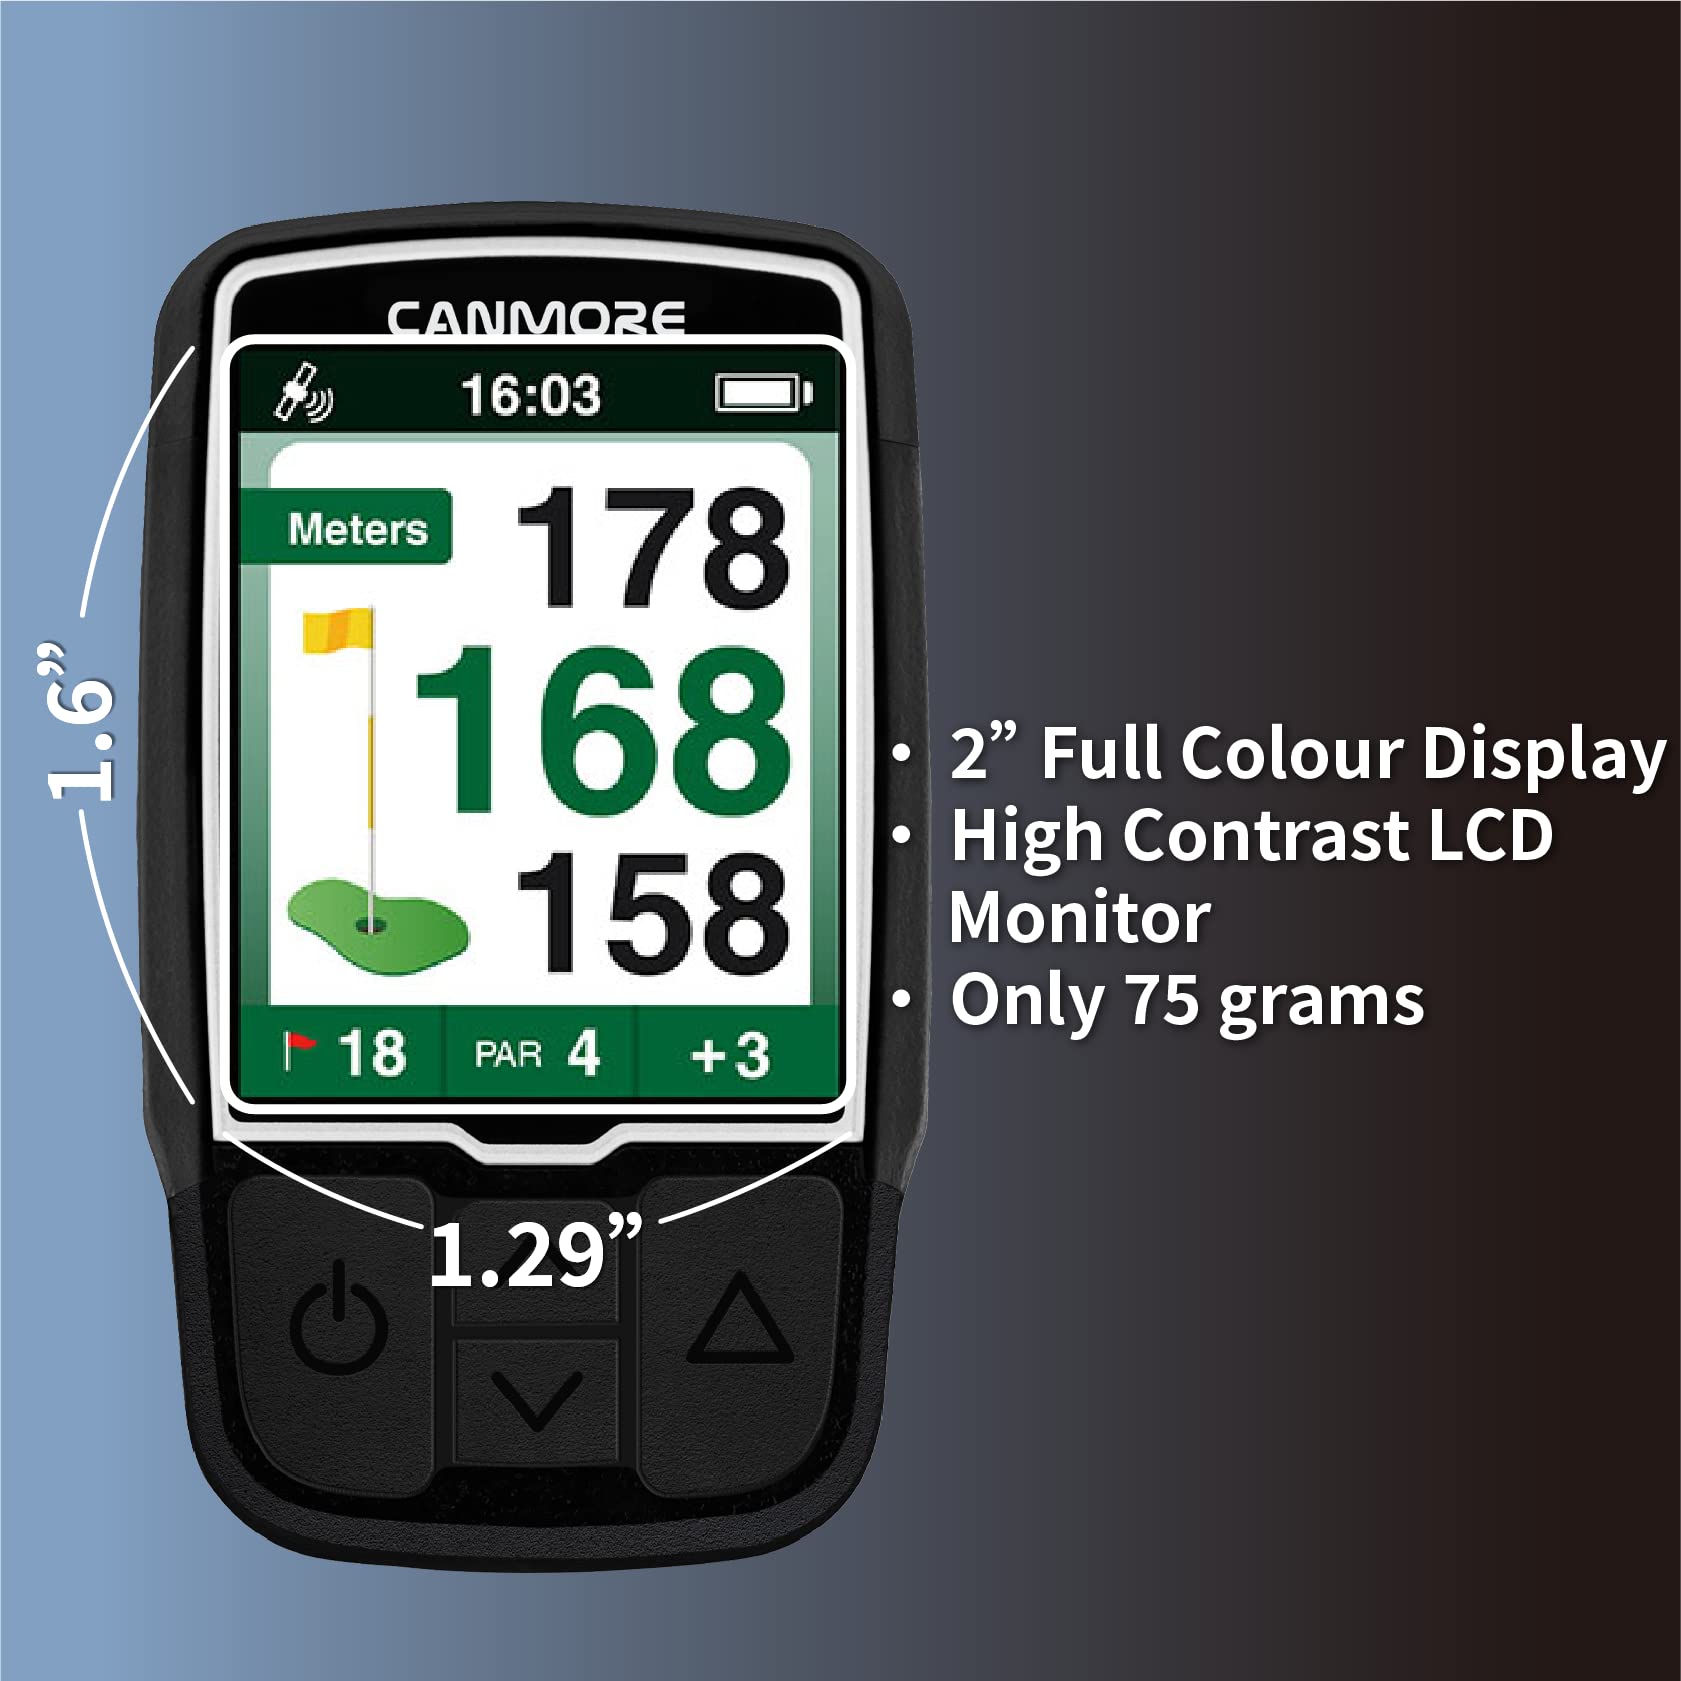 CANMORE Handheld Golf GPS HG200 - Water Resistant Full-Color Display with 38,000+ Essential Golf Course Data and Score Sheet - Free Courses Worldwide and Growing (Orange)